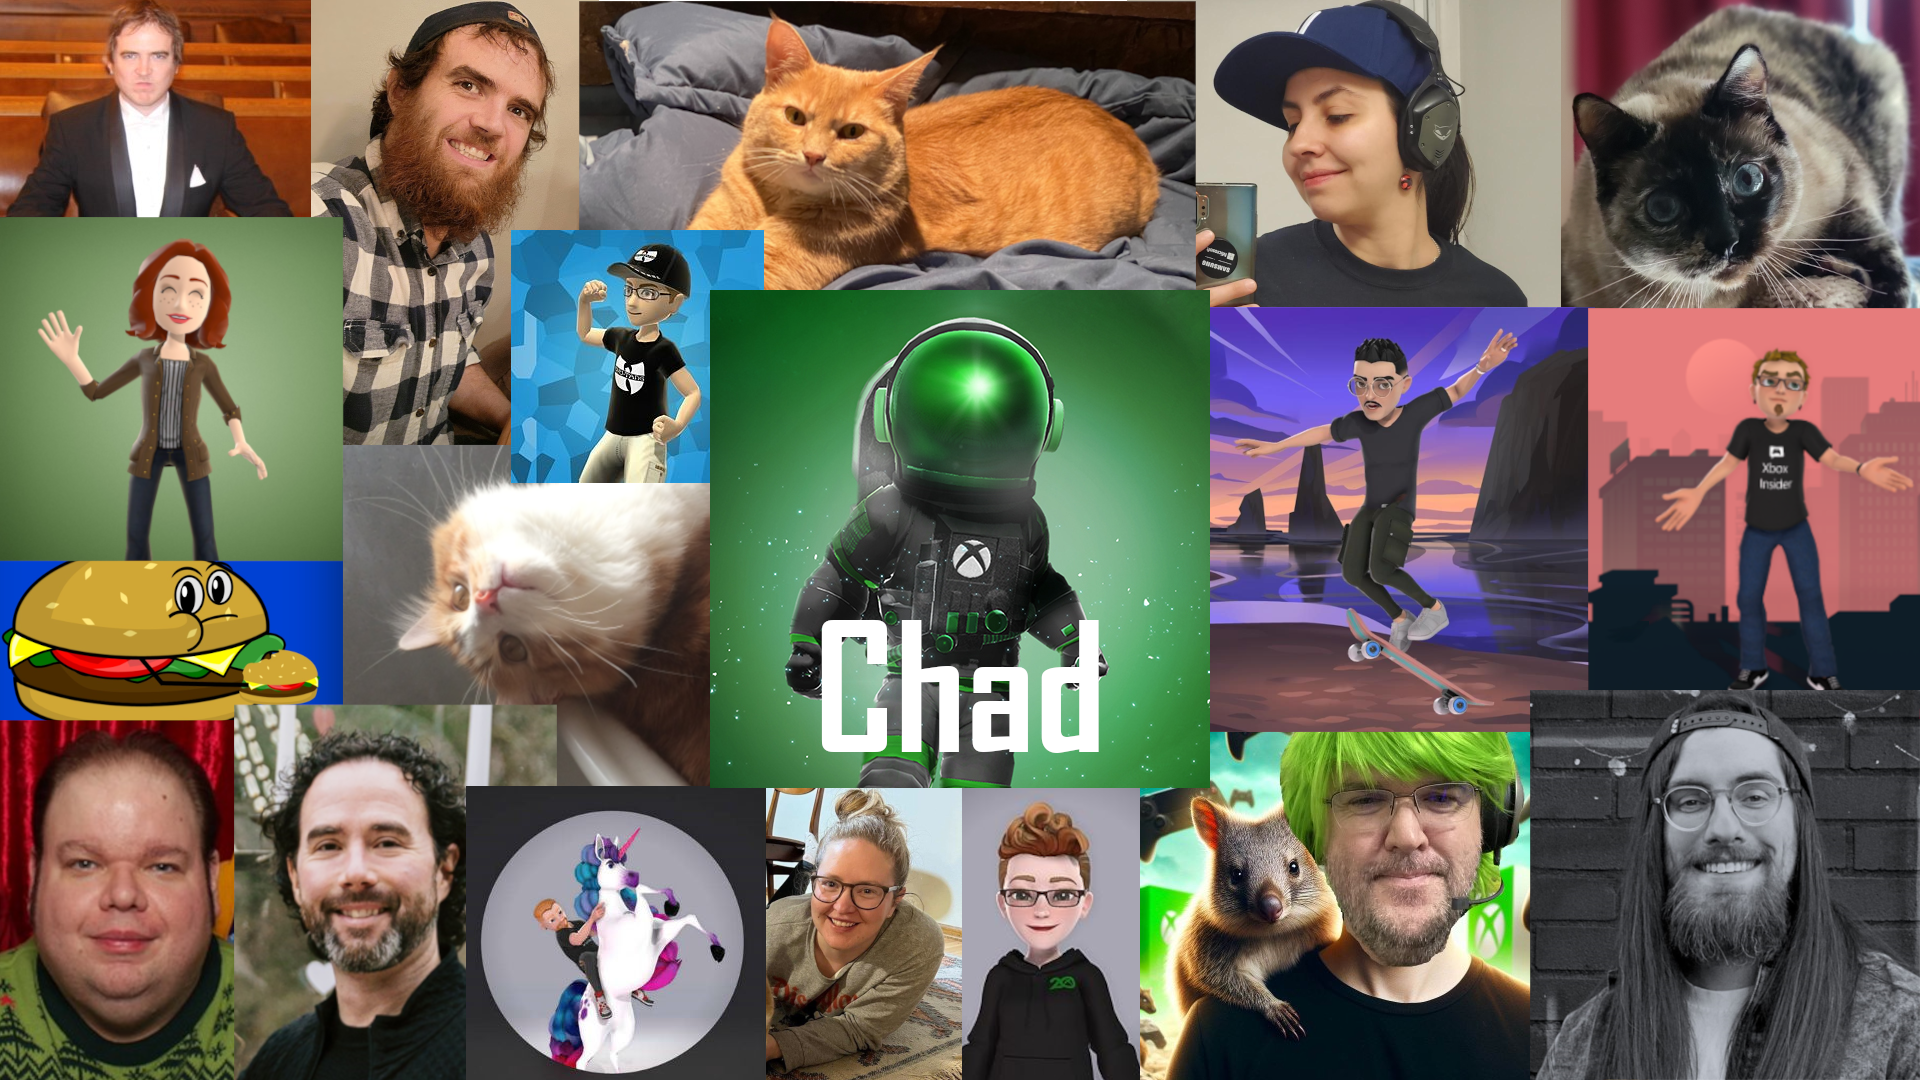 Get To Know Our Team: Chad – Senior Software Engineer